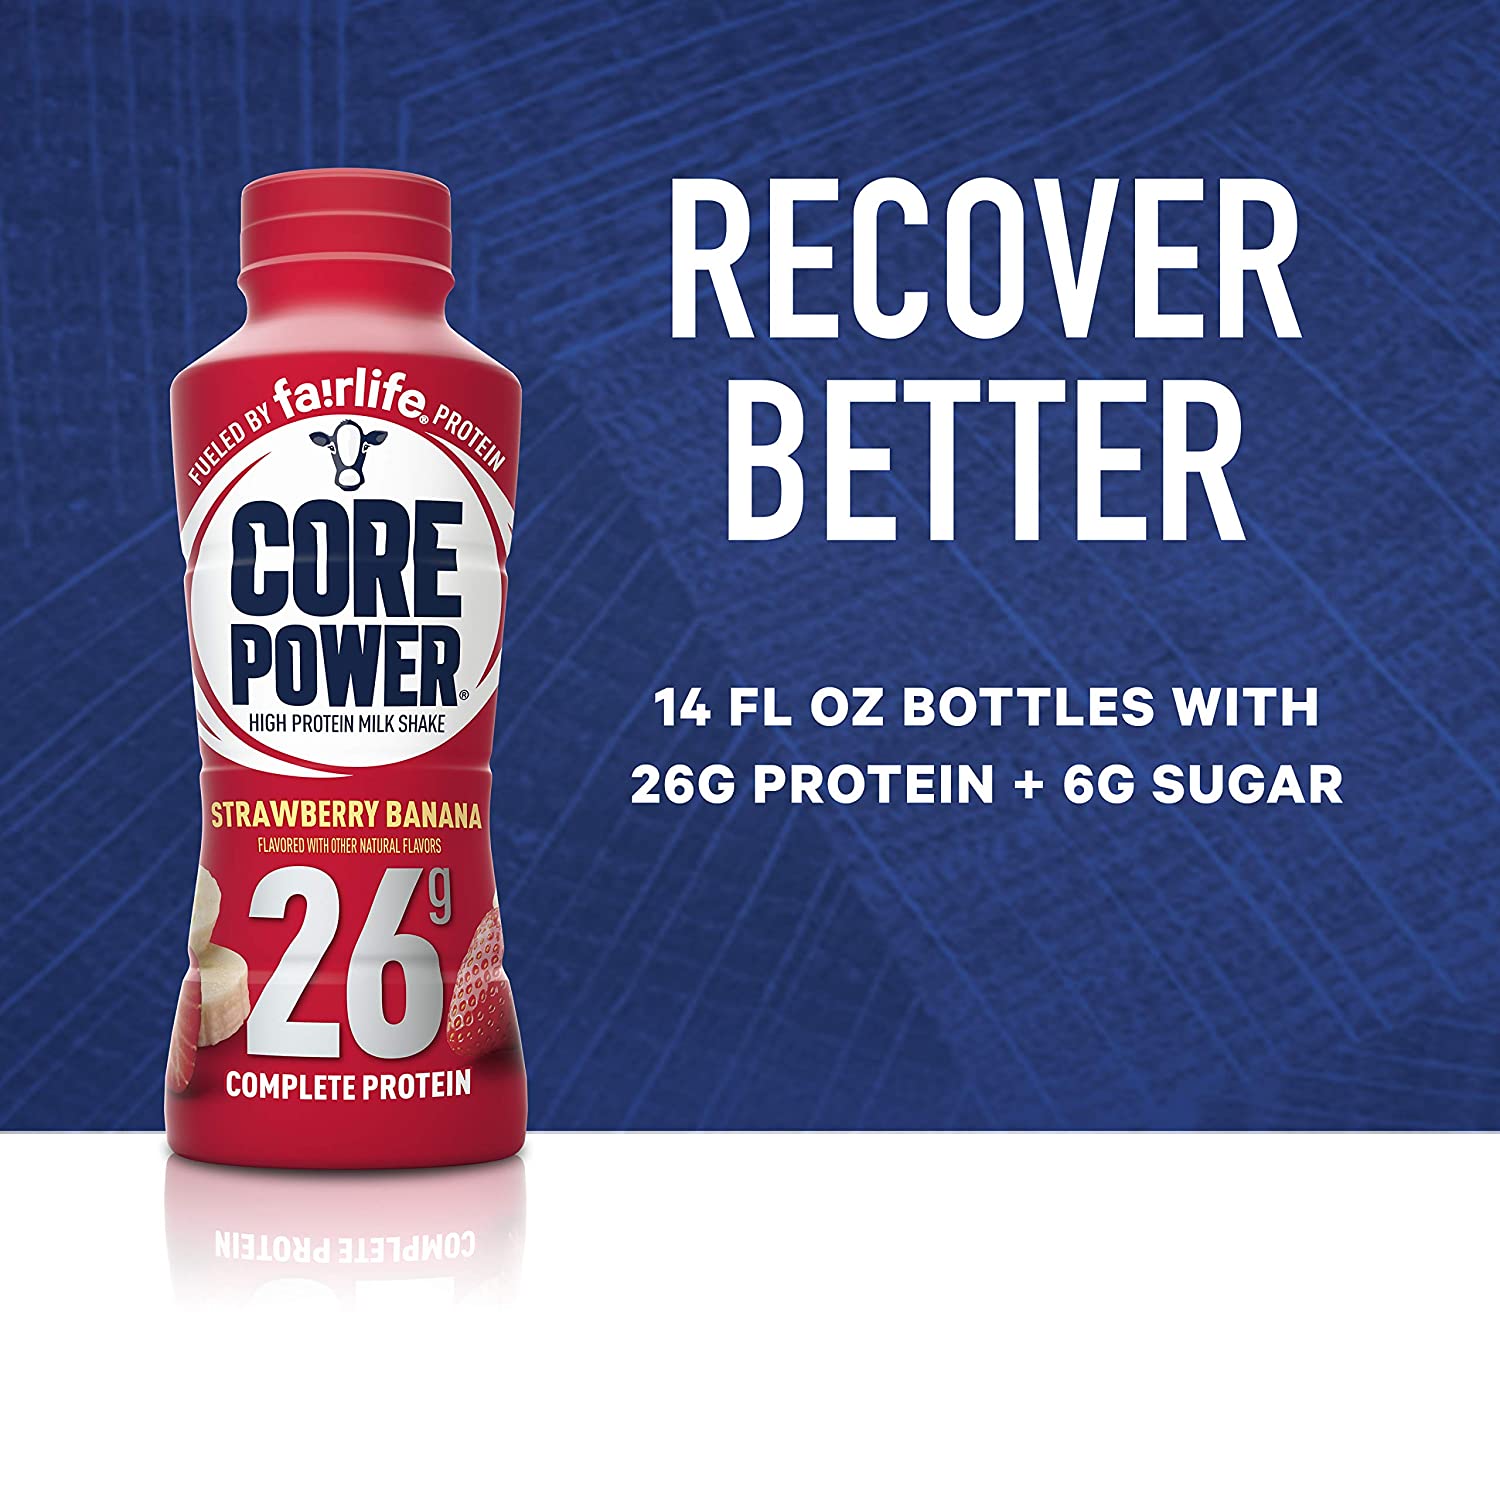 Fairlife Core Power High Protein Shake, Strawberry Banana / 12 / 414ml, Recover Better, SNS Health, Protein Shake